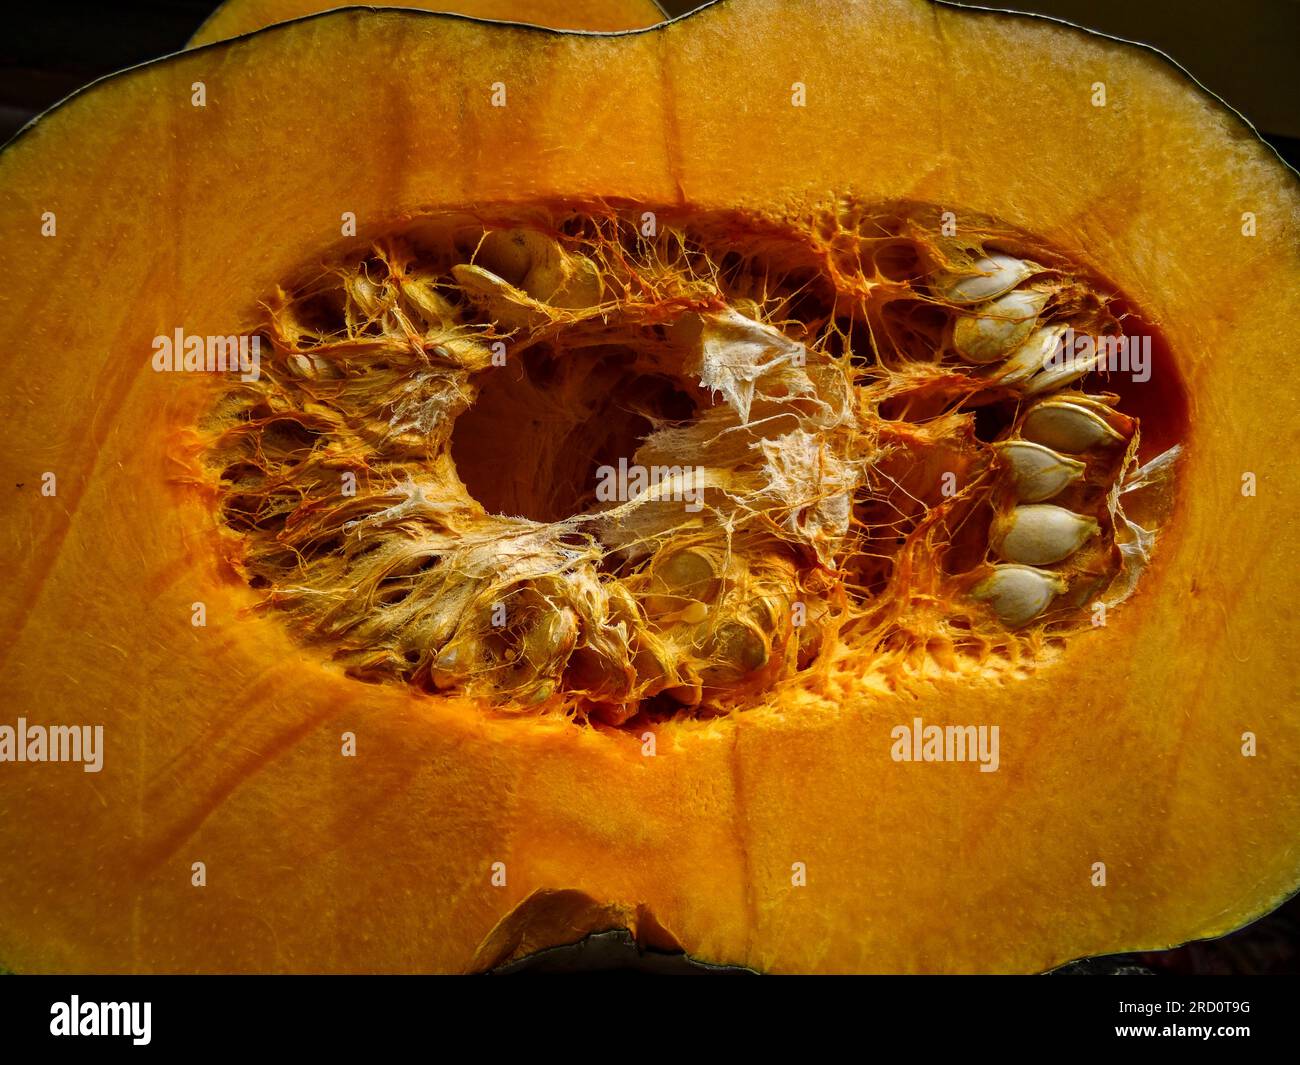 Food close up of pumpkin sliced for sale showing seeds Stock Photo